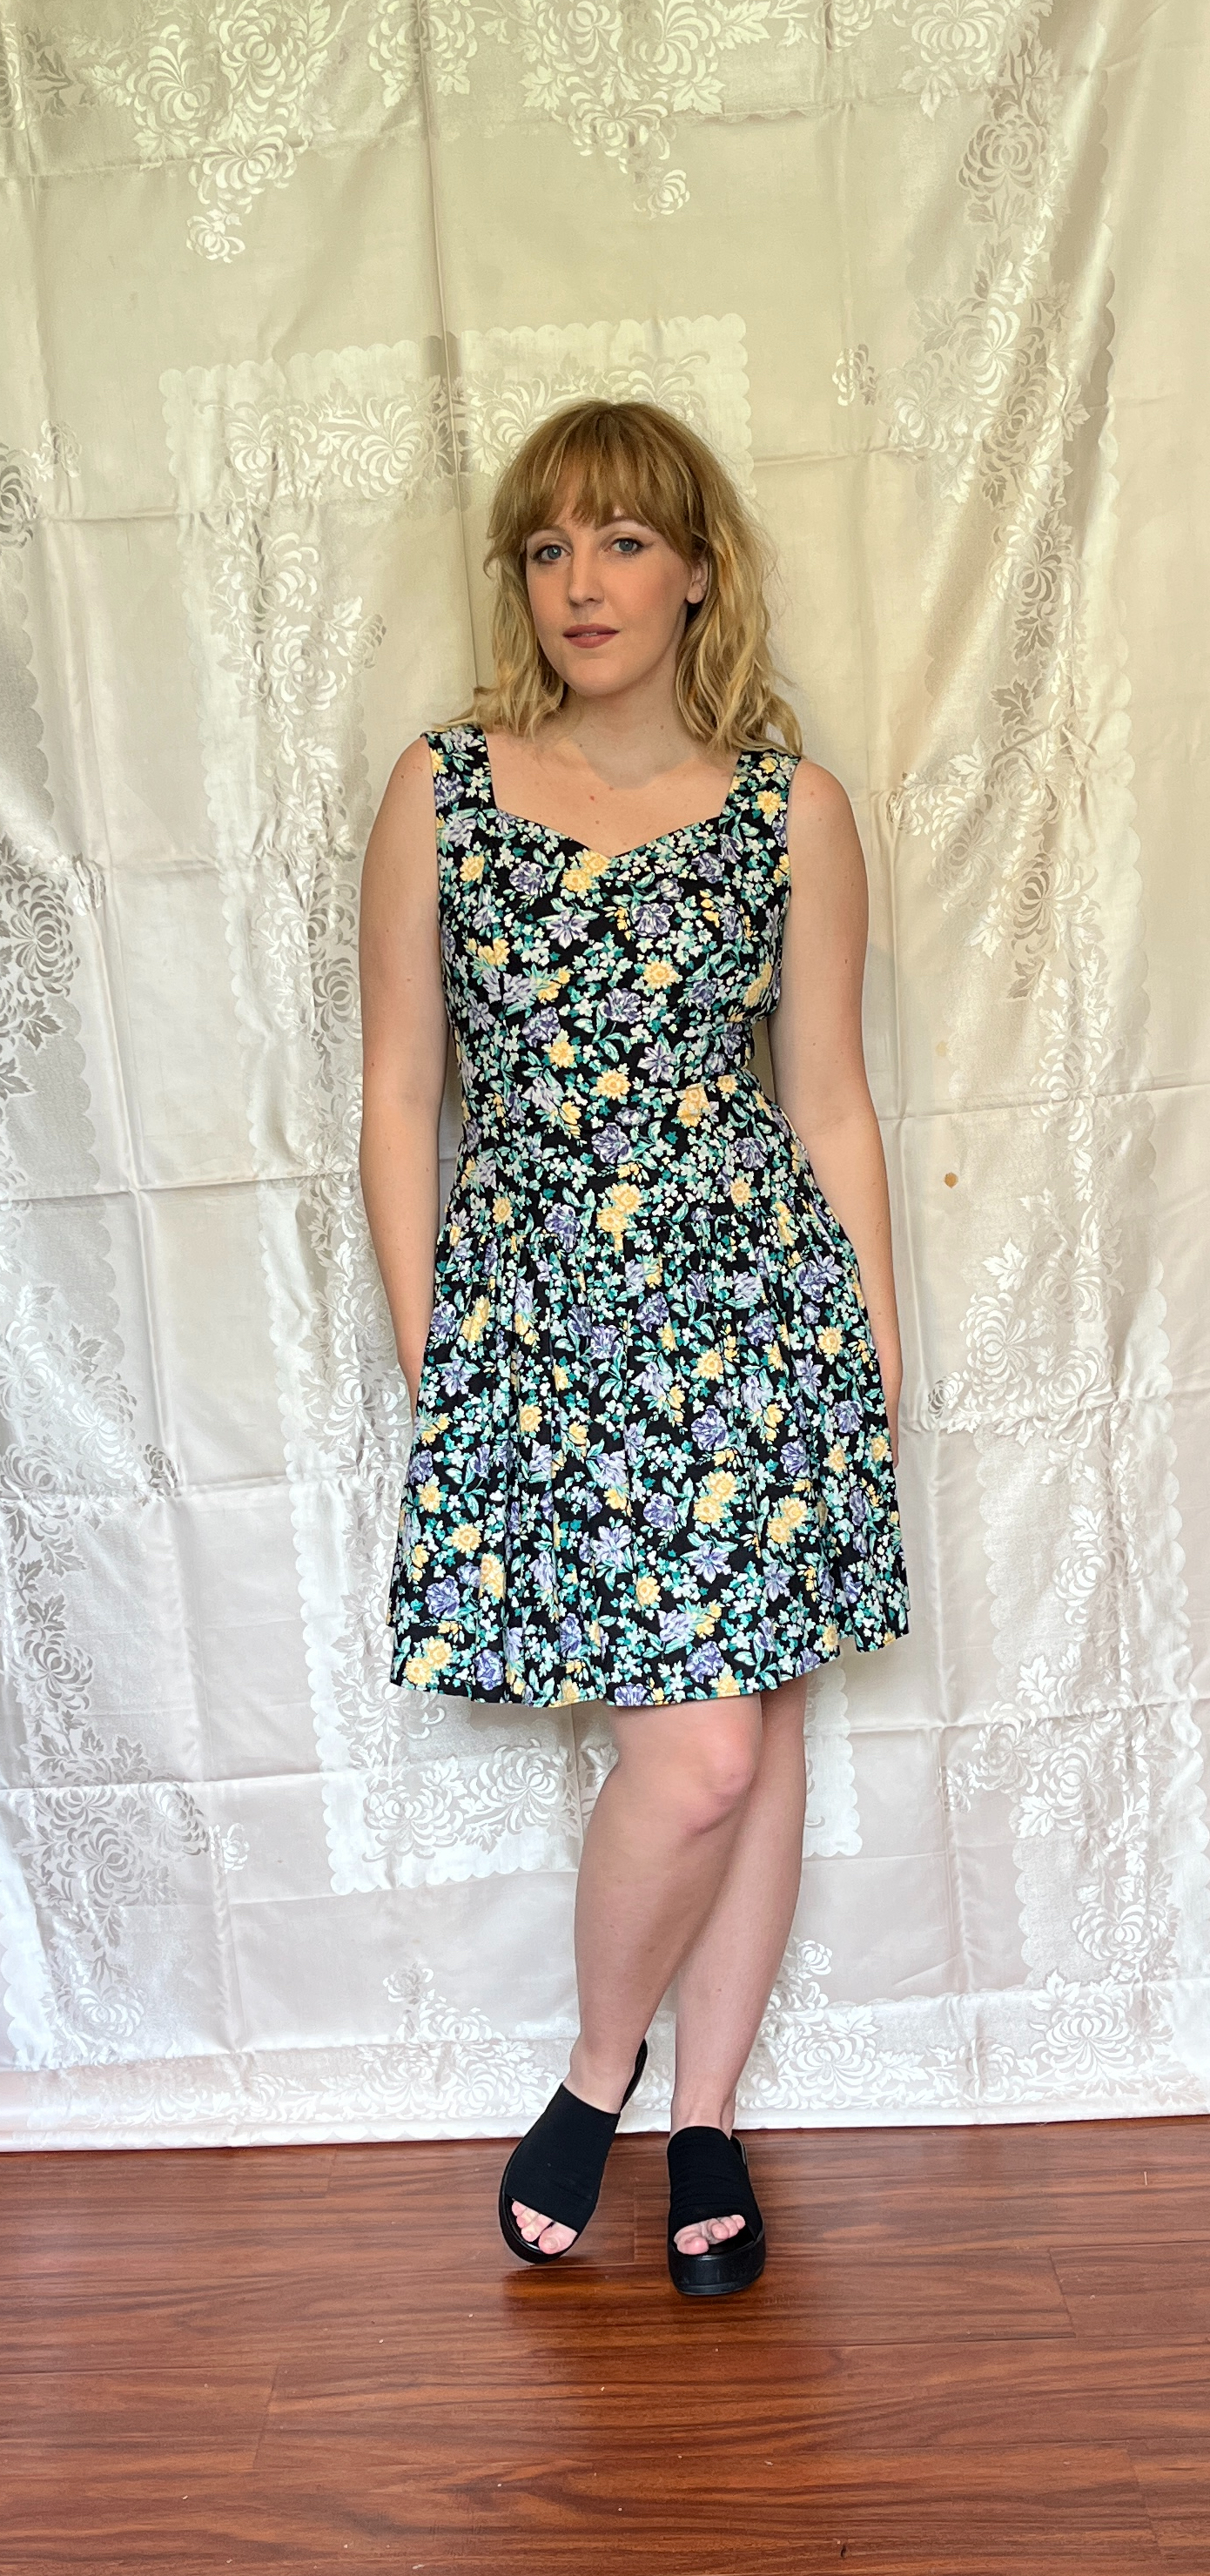 Vintage 1980’s "Laura Ashley" Black with Blue & Yellow Floral Dress